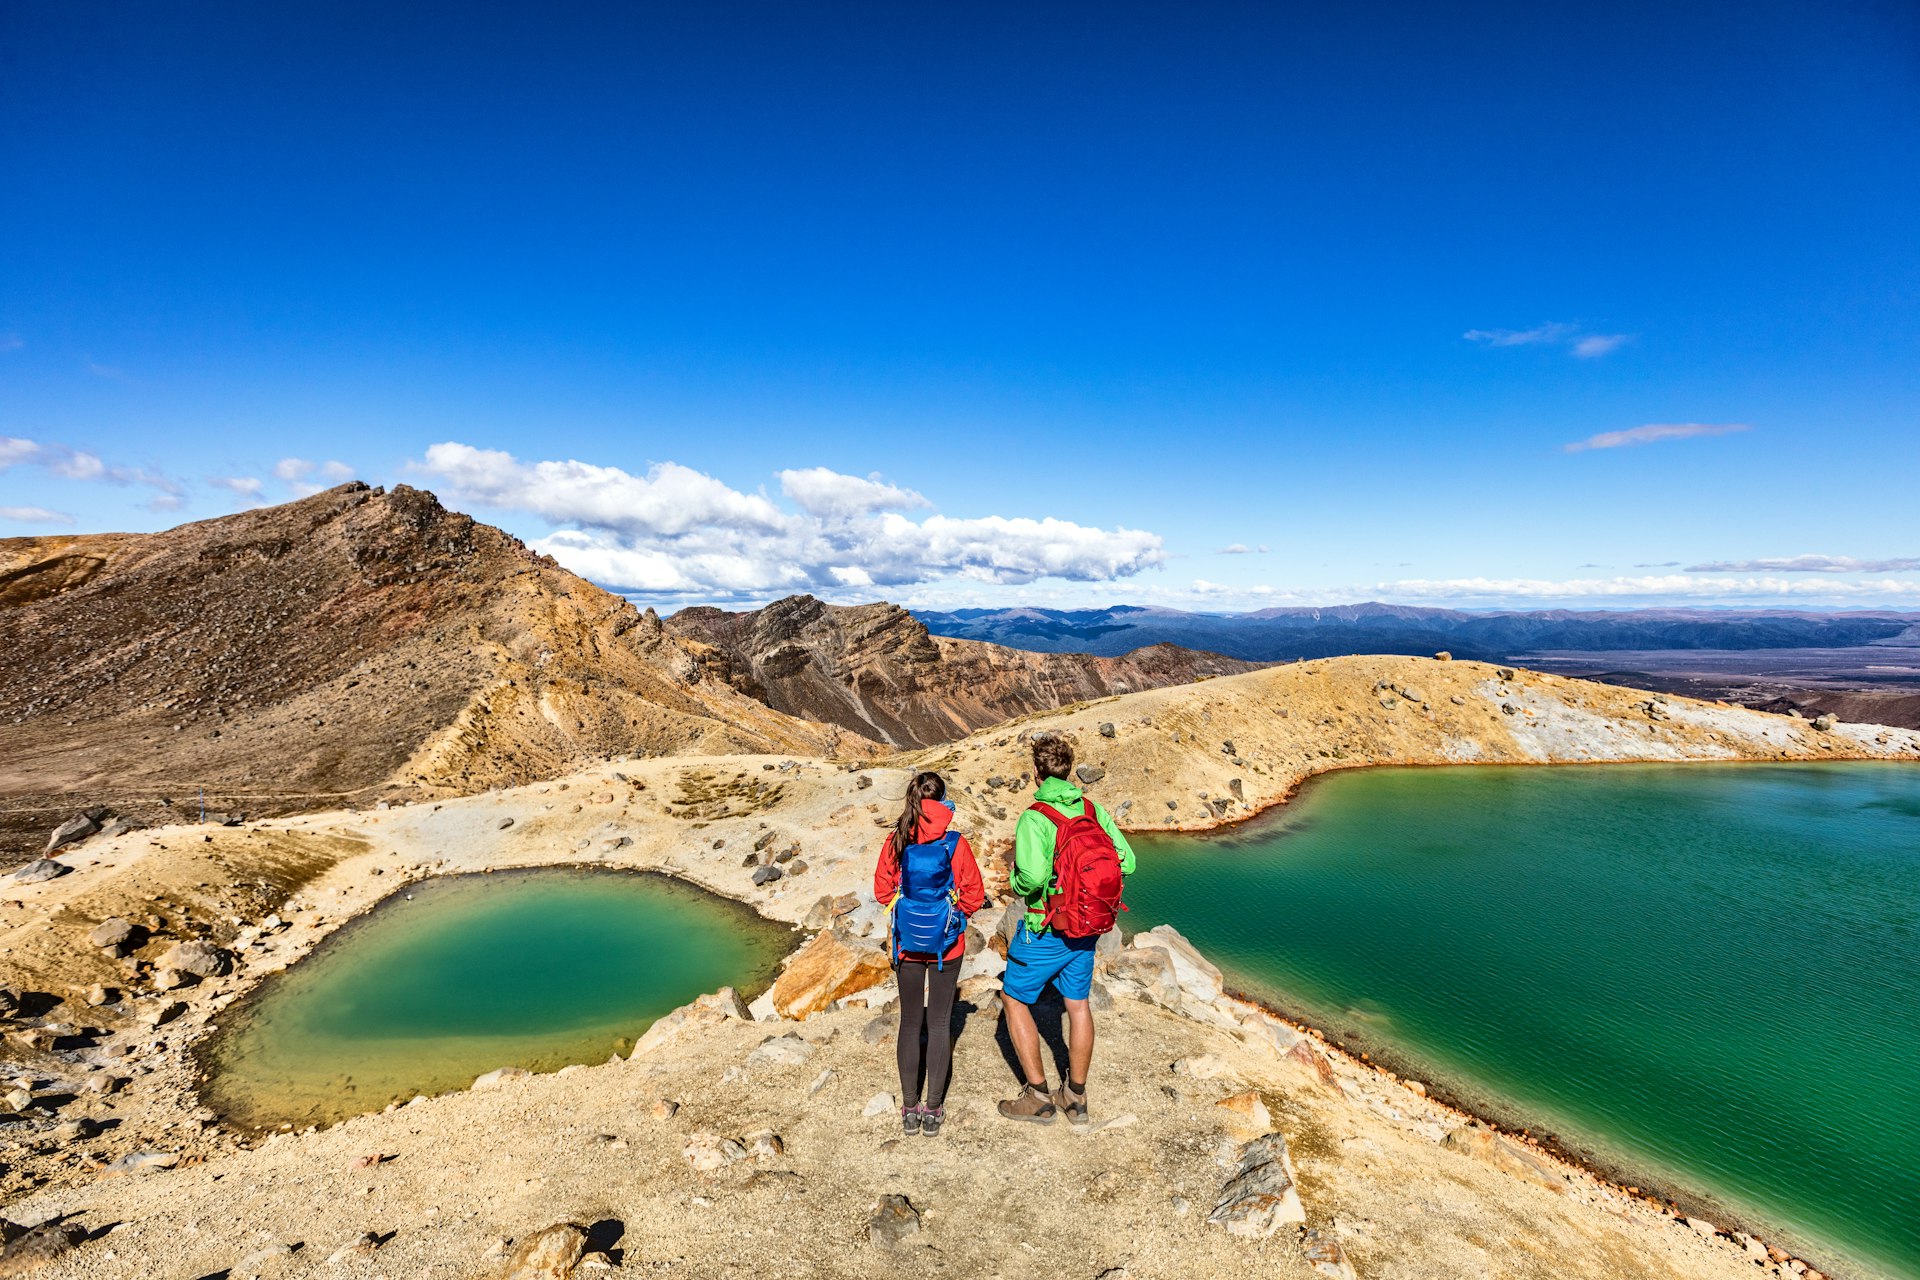 Two hikers stand between bright green lakes looking out over the landscape